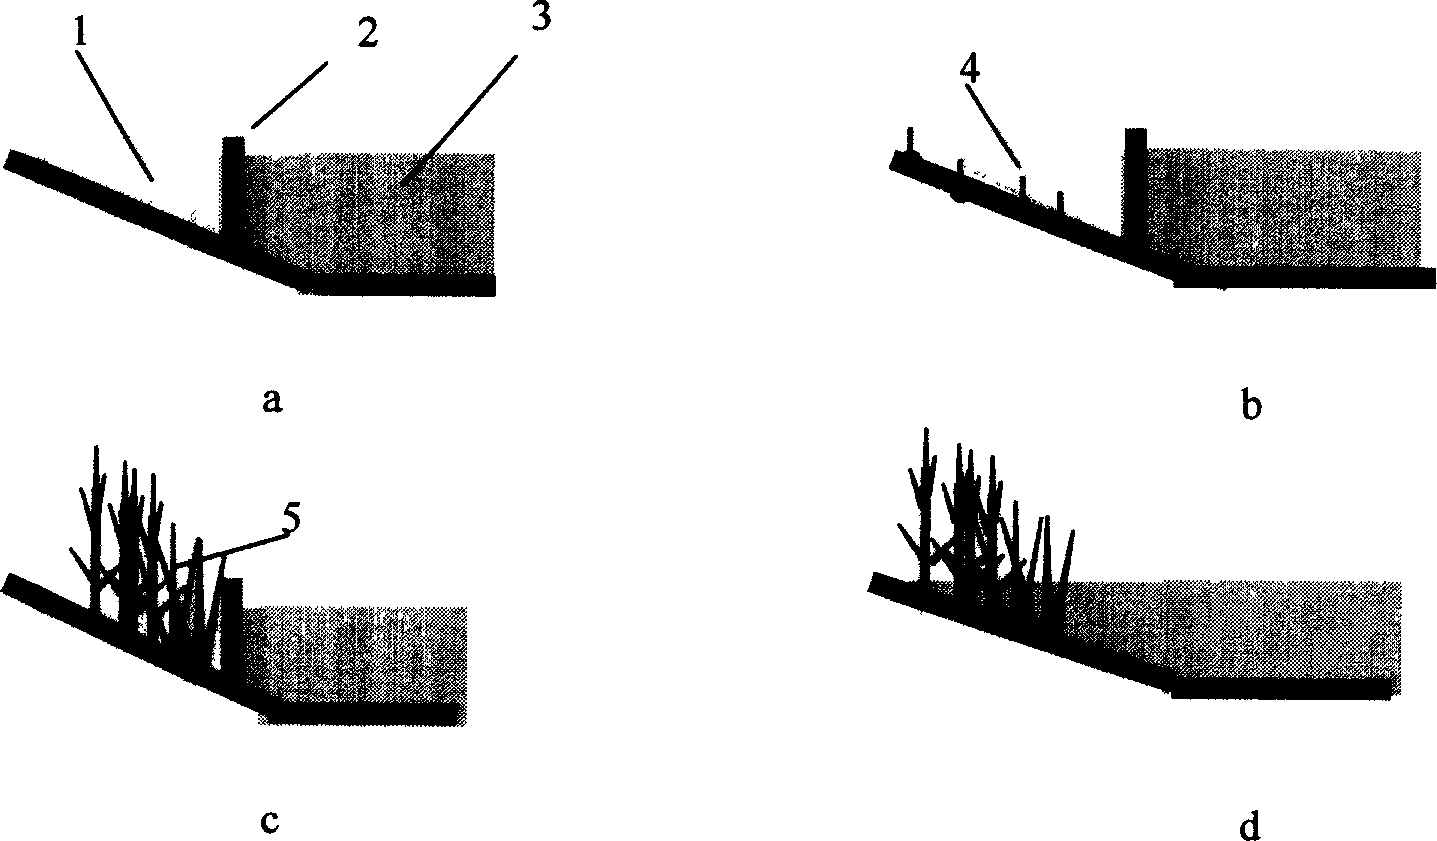 Method for building up water's edge with reeds